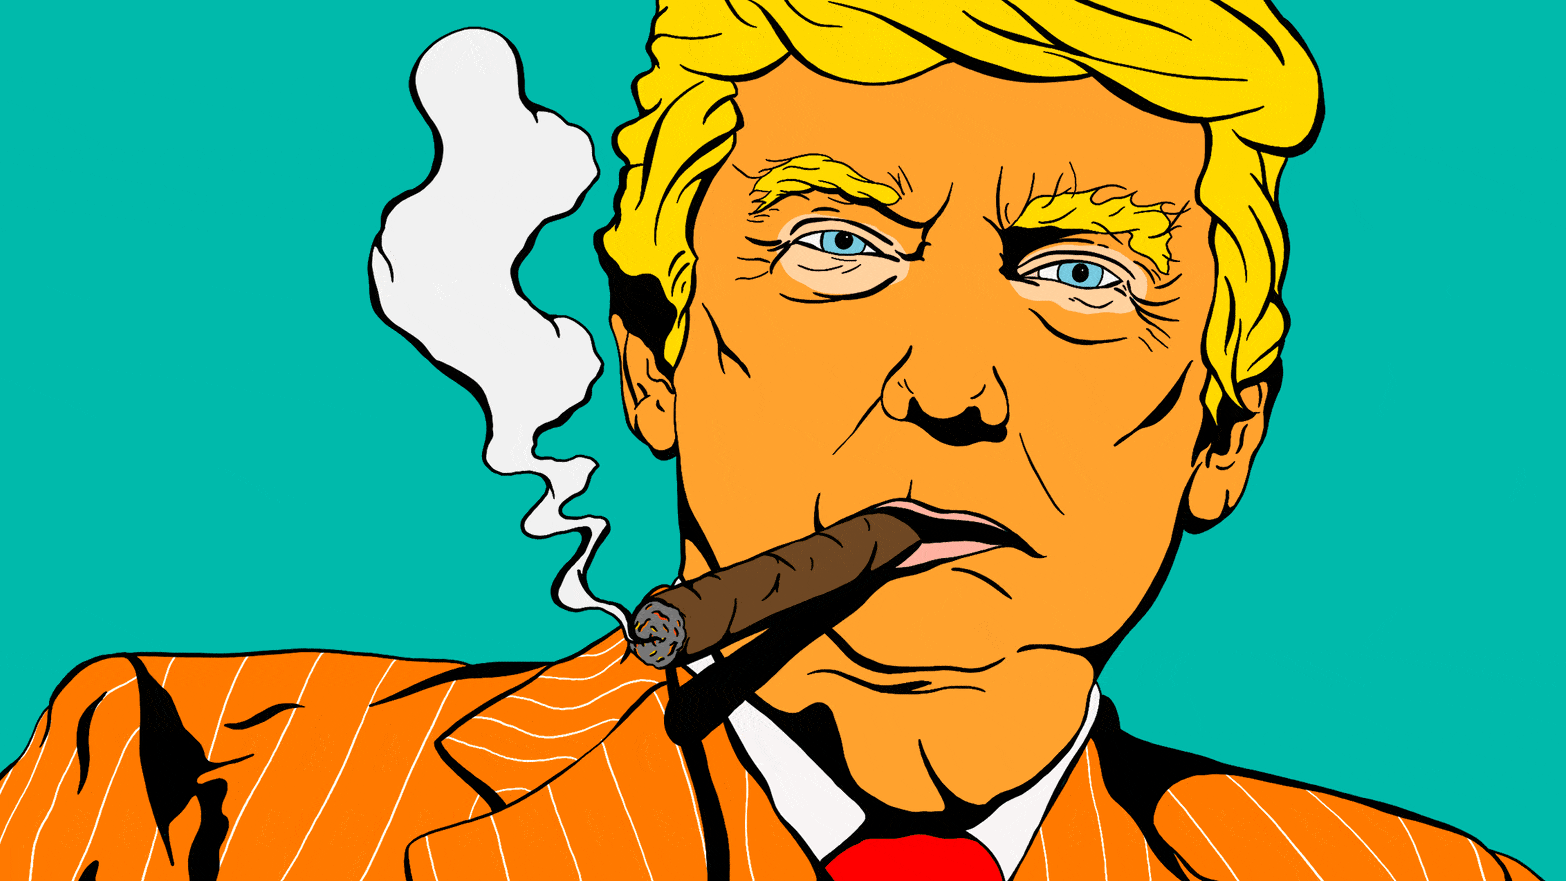 Illustrated gif of Donald Trump smoking a cigar in a orange pinstripe suit.